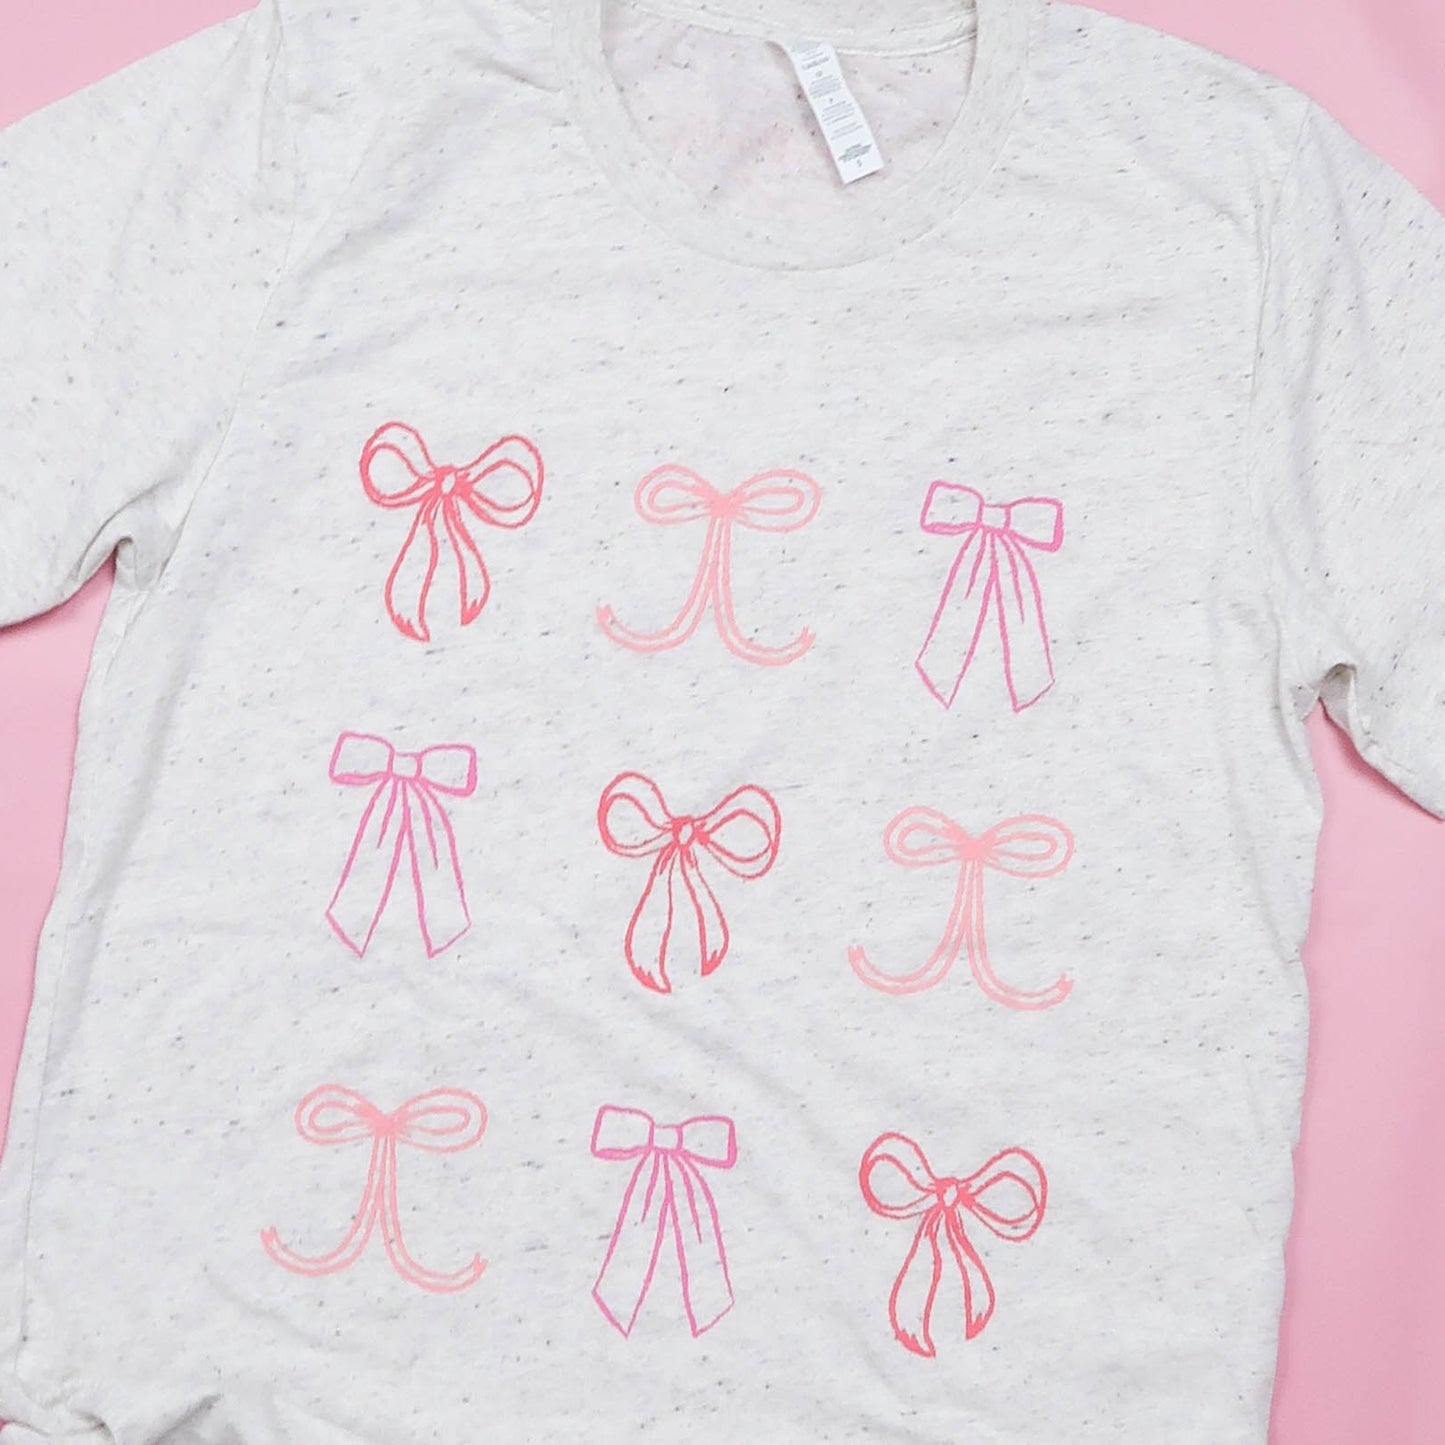 Bows On Bows Tee